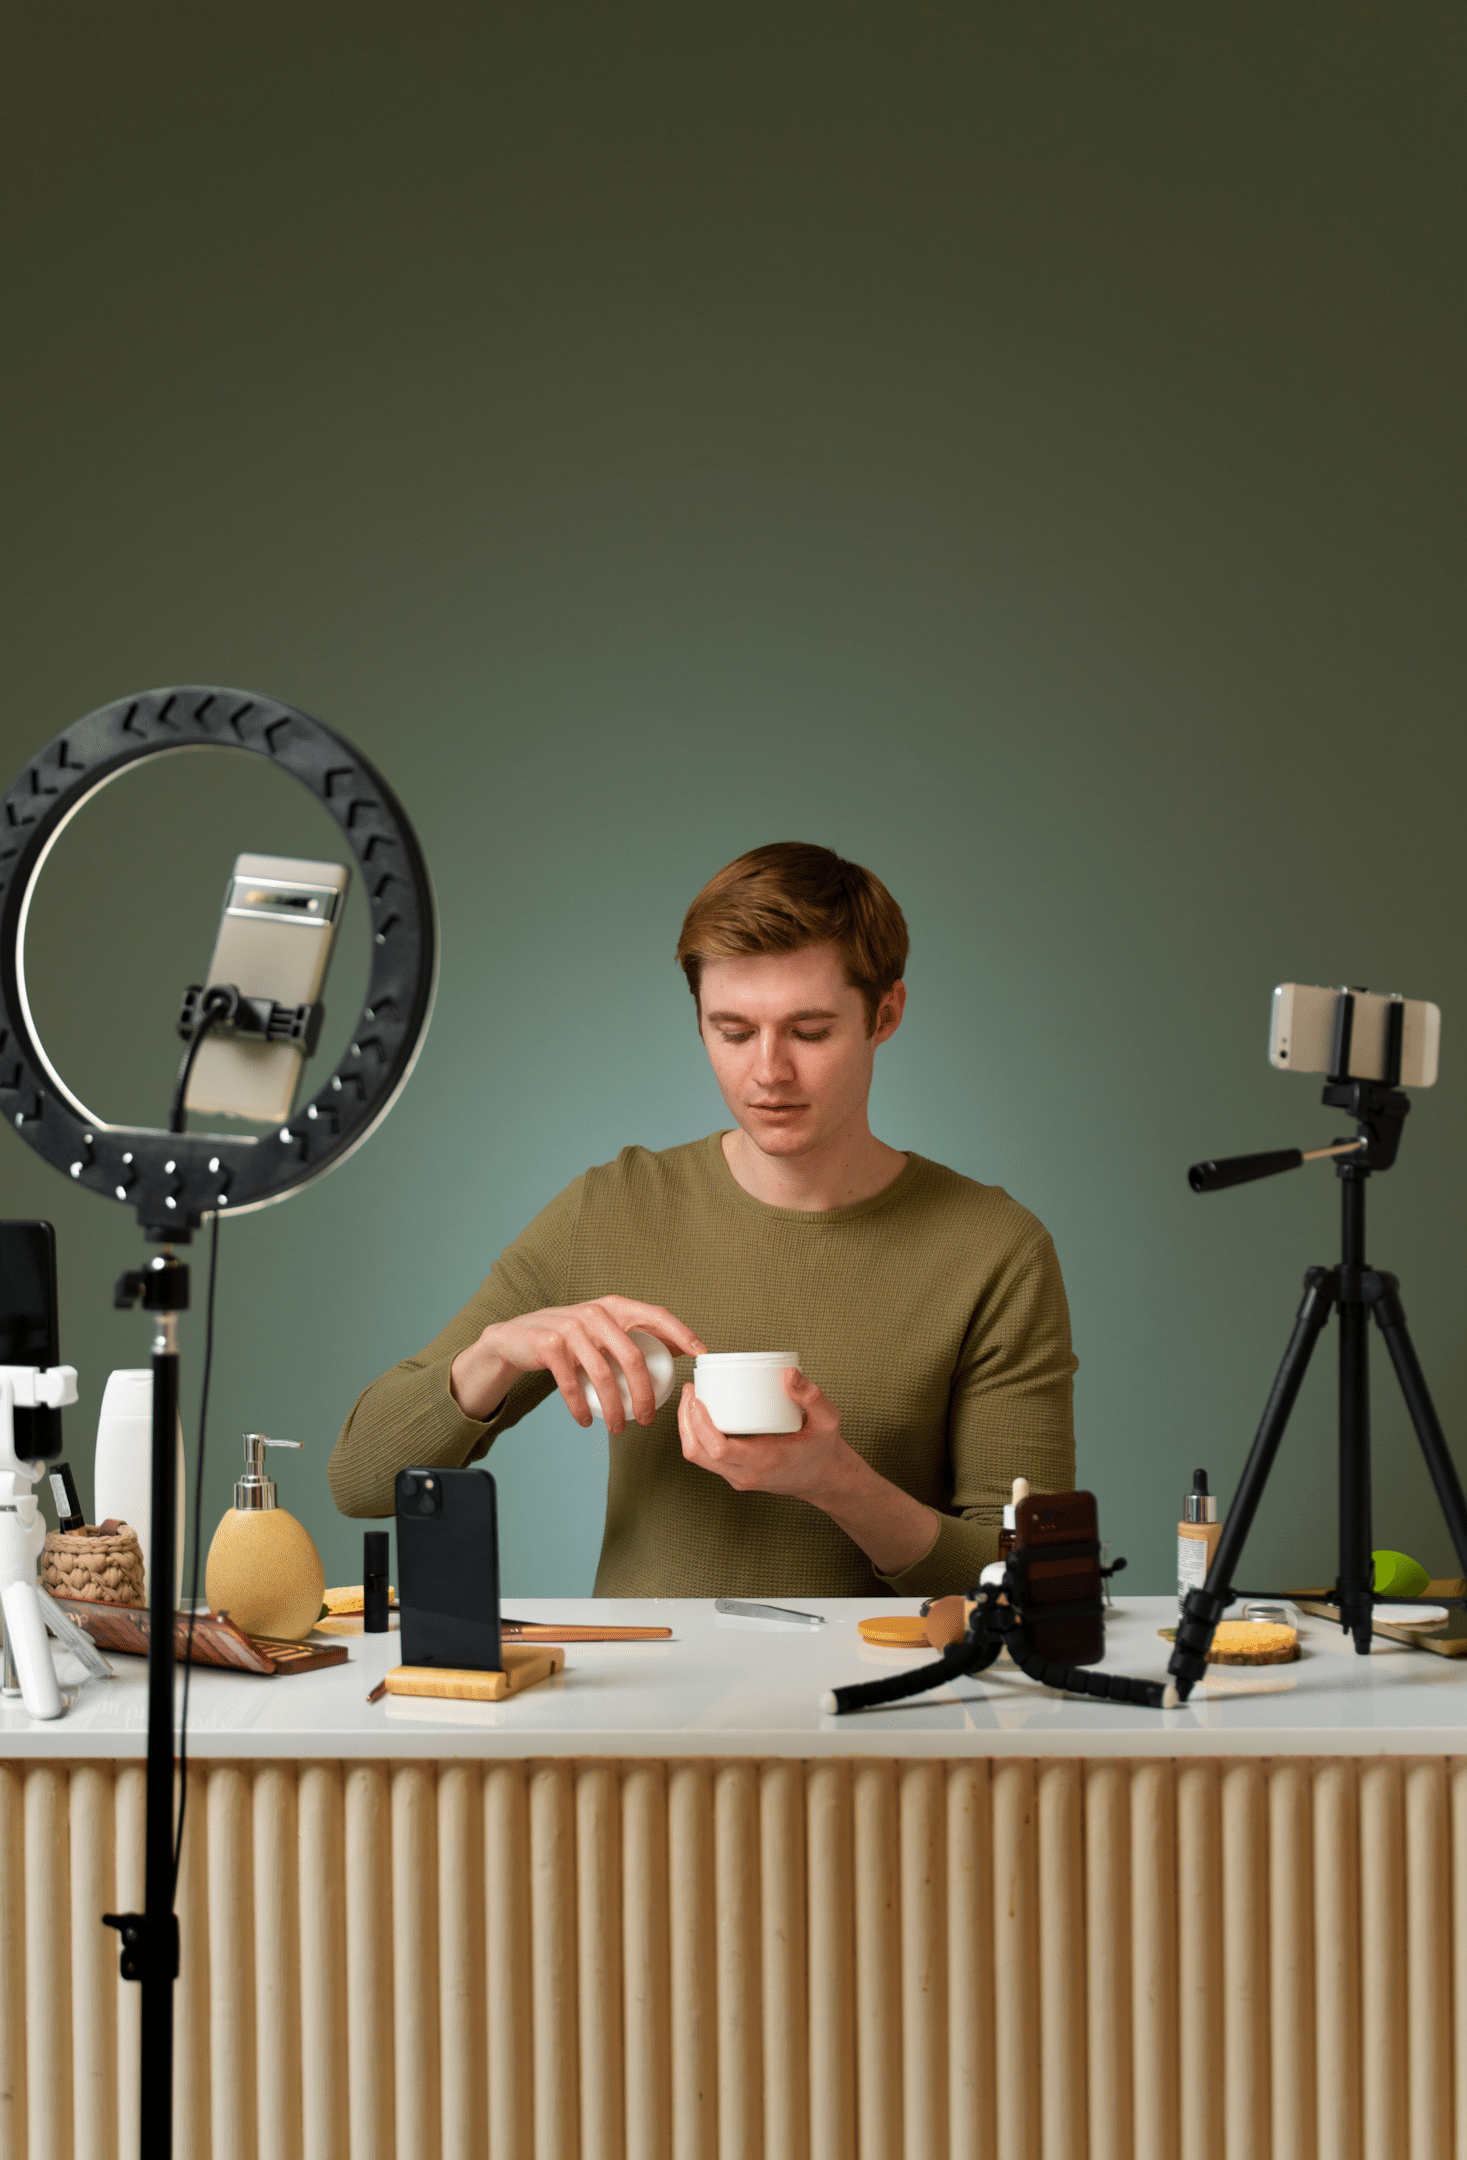 An image showing a person filming a product demonstration video, which is a great example of what video marketing content should i make for my company.